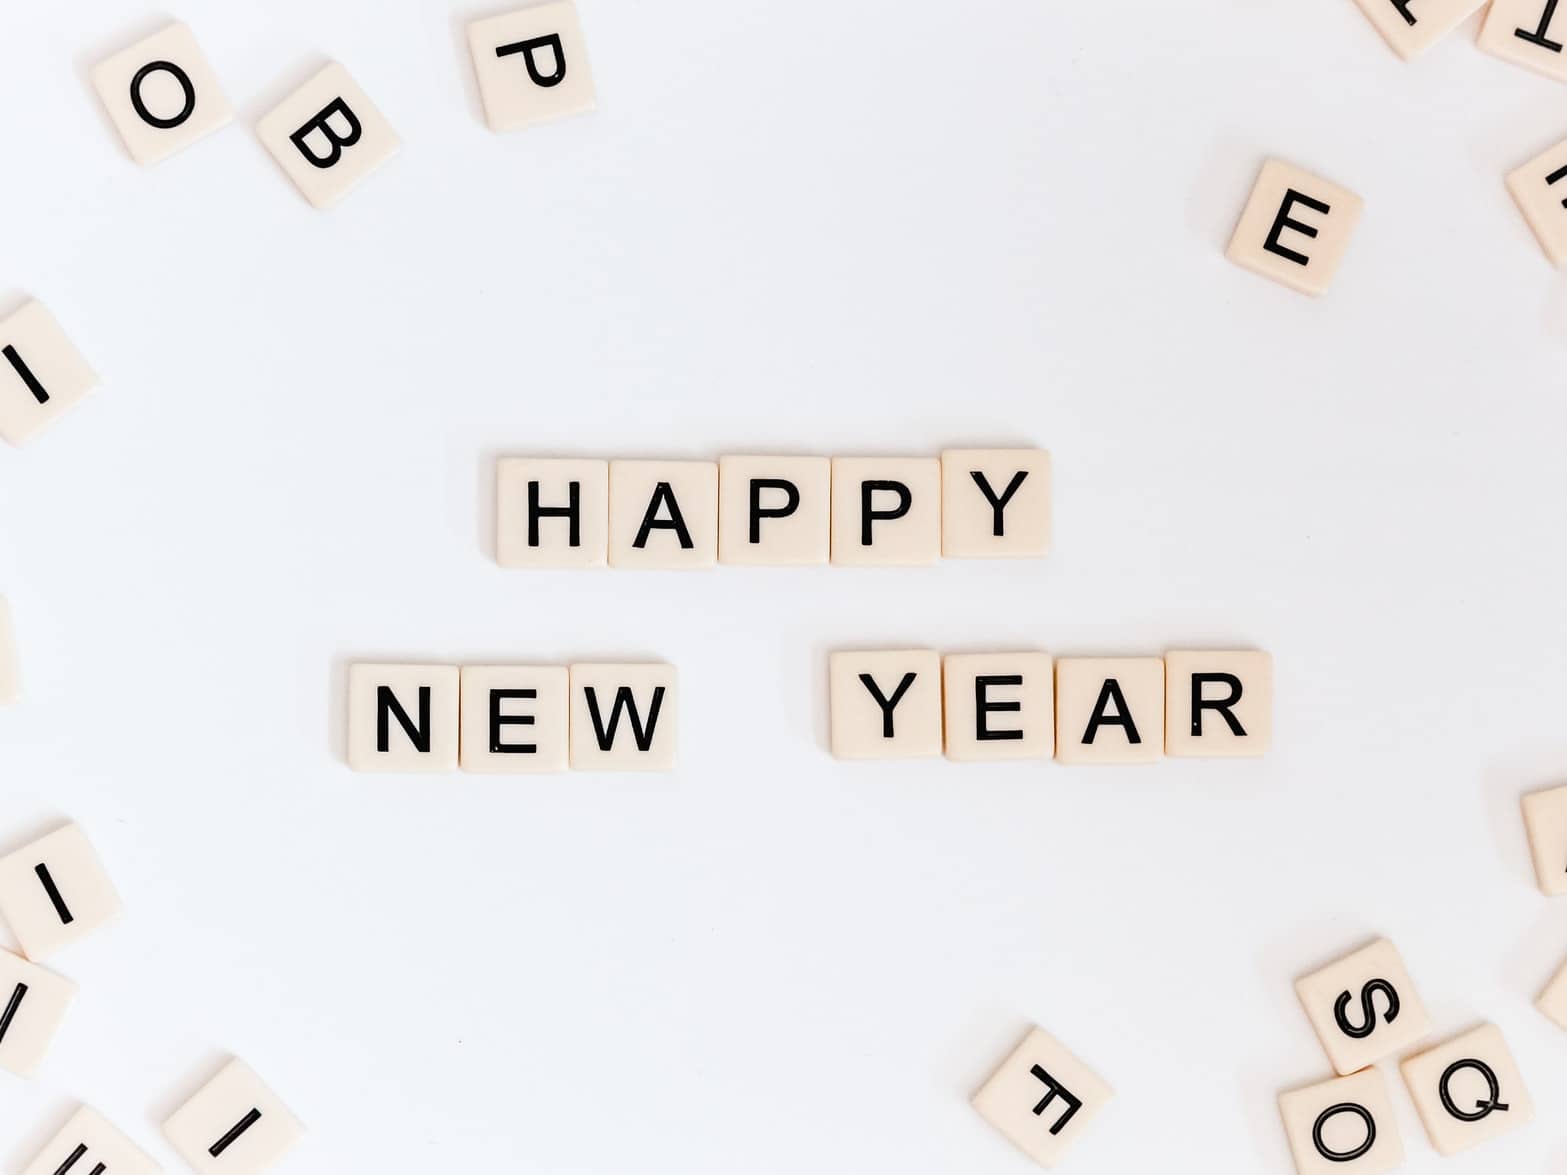 scrabble letters spelling out Happy New Year